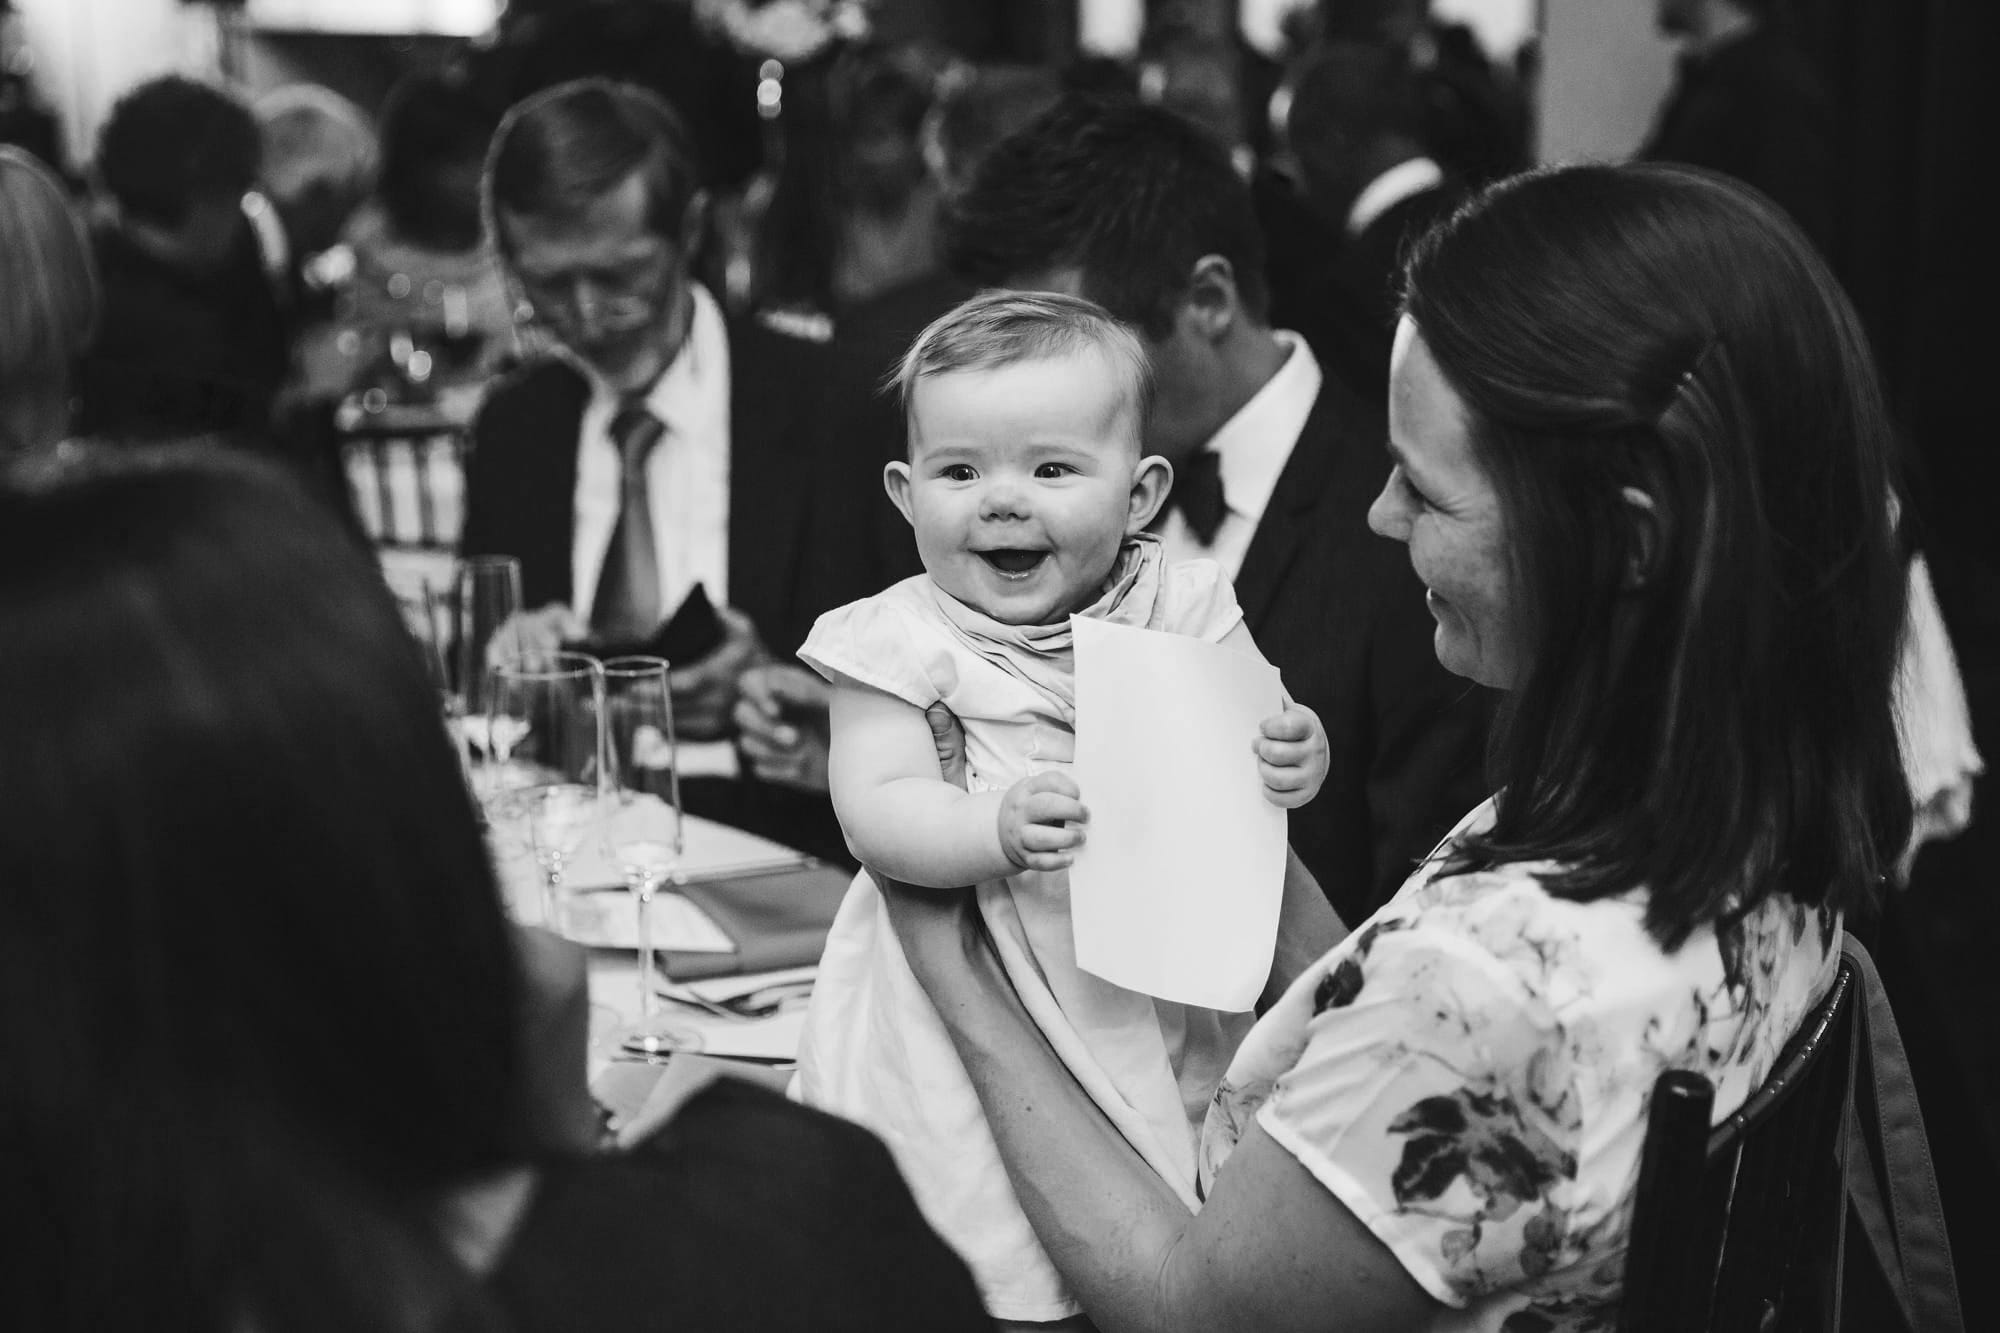 A documentary photograph of a baby laughing during a state room wedding reception